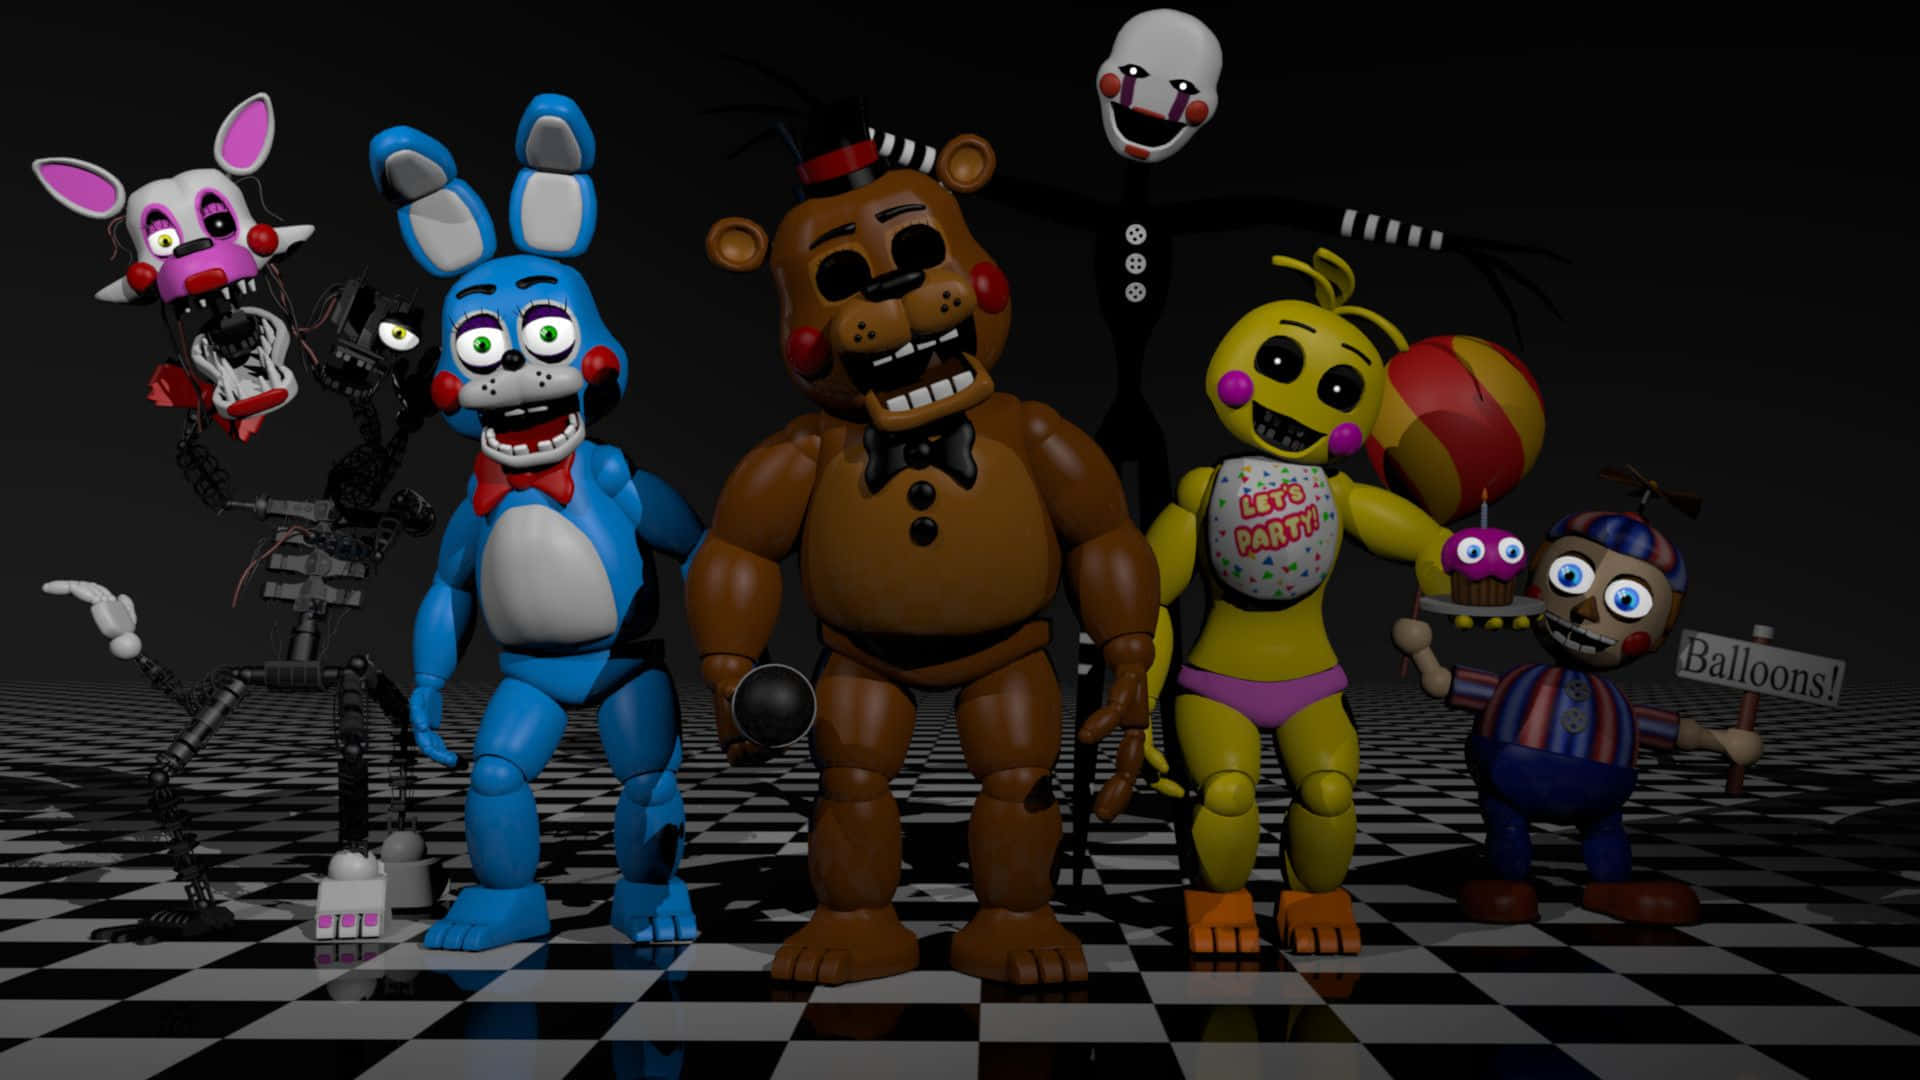 These four robotic mascots will haunt your dreams in Five Nights at Freddy's.